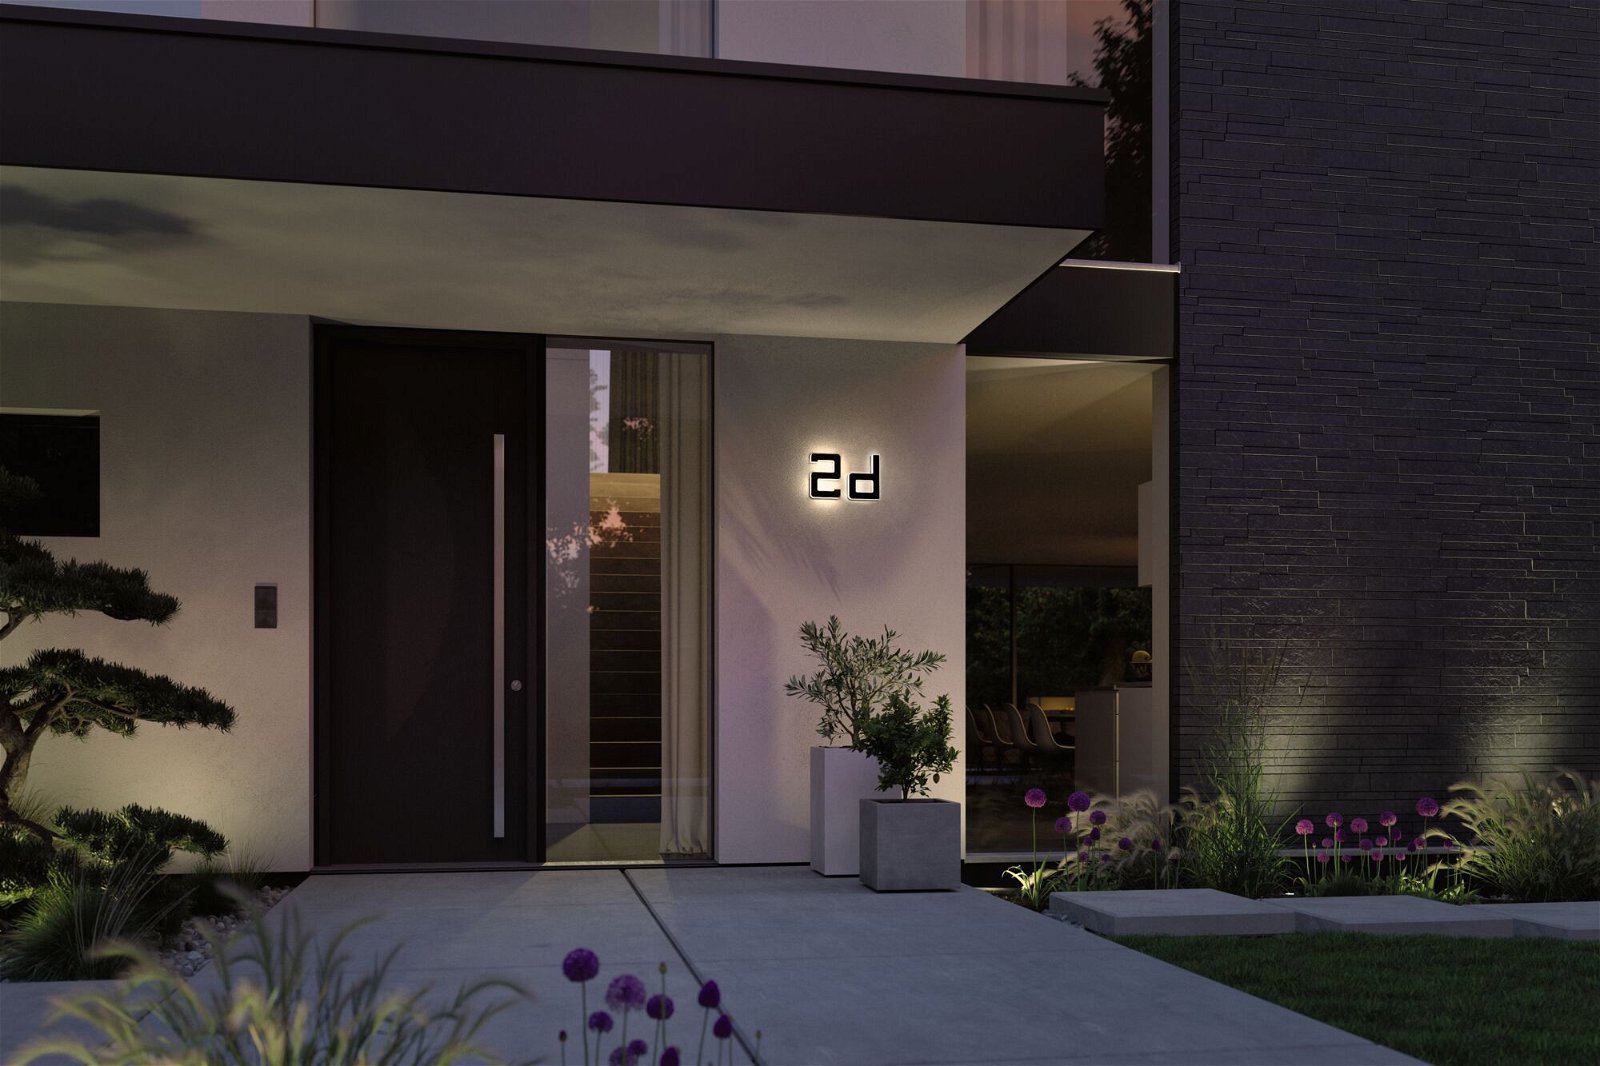 Solar LED House number luminaire incl. changeable battery Letter D incl. replaceable battery IP44 3000K 6lm Black